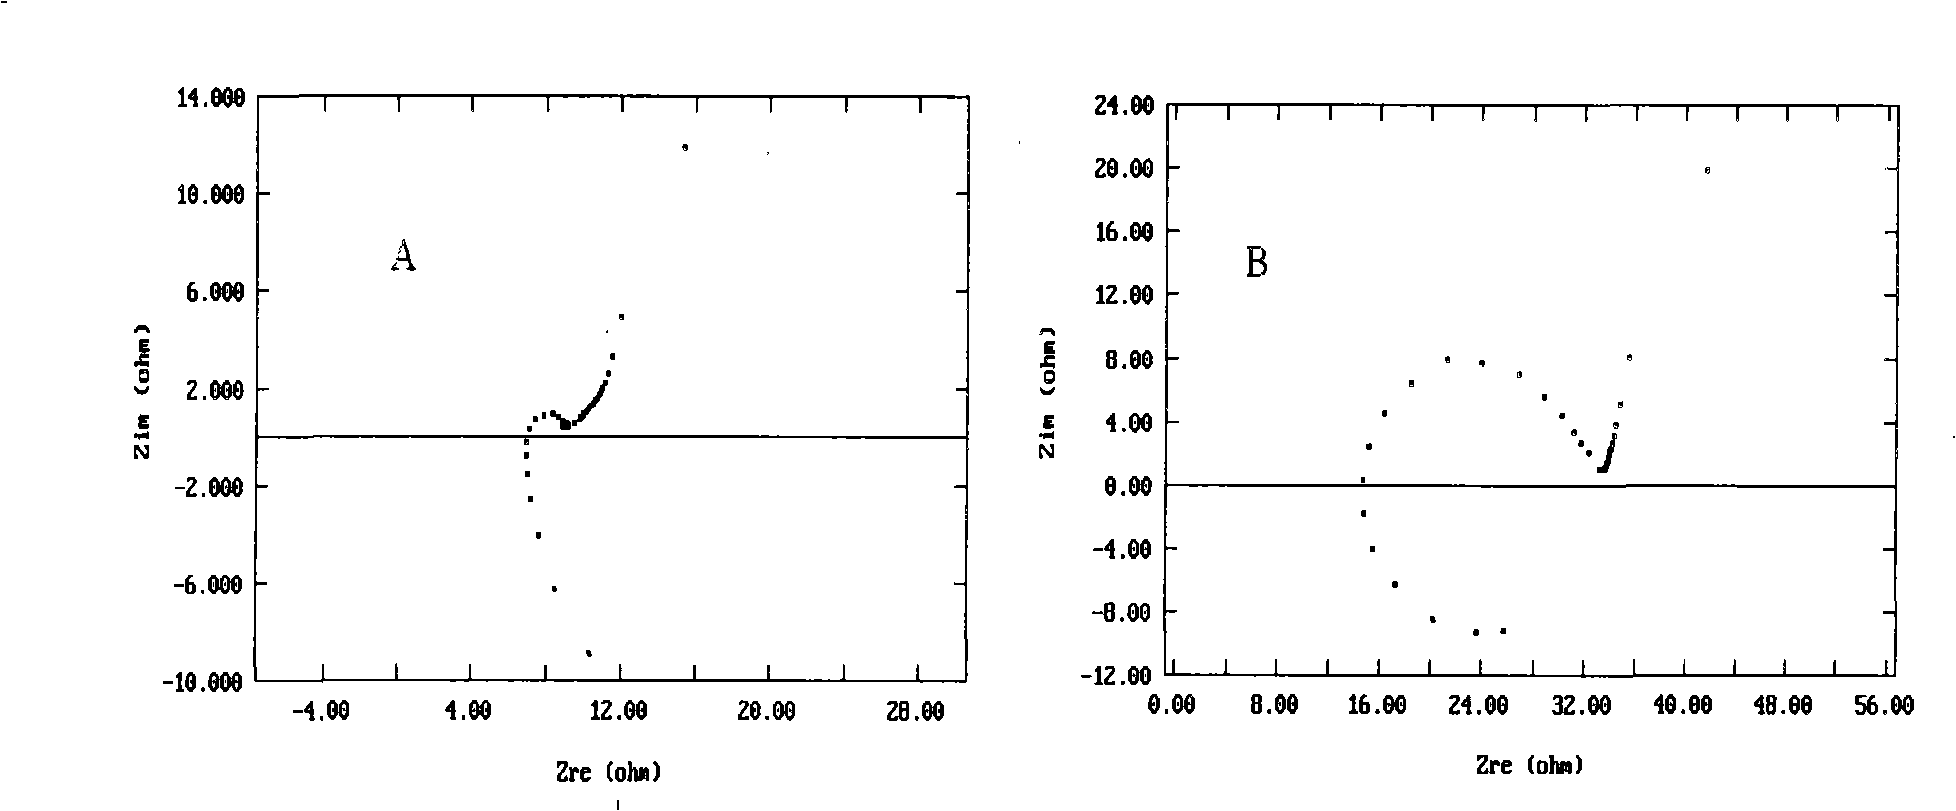 Lithium/thionyl chloride(Li/SOCl2) battery containing bromine chloride